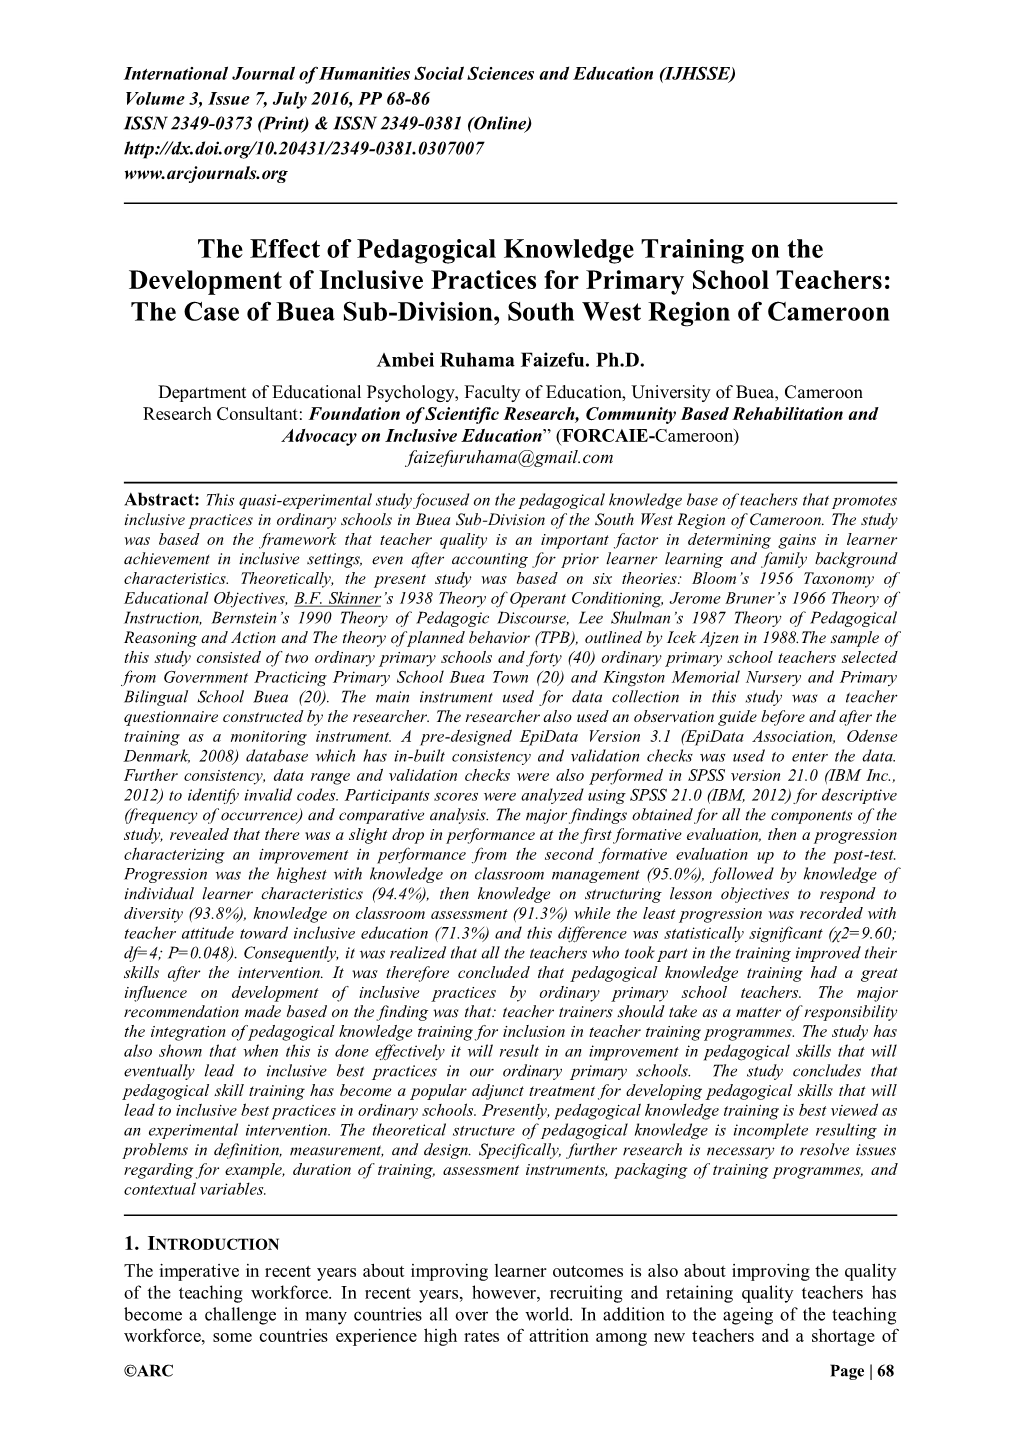 The Effect of Pedagogical Knowledge Training on the Development Of